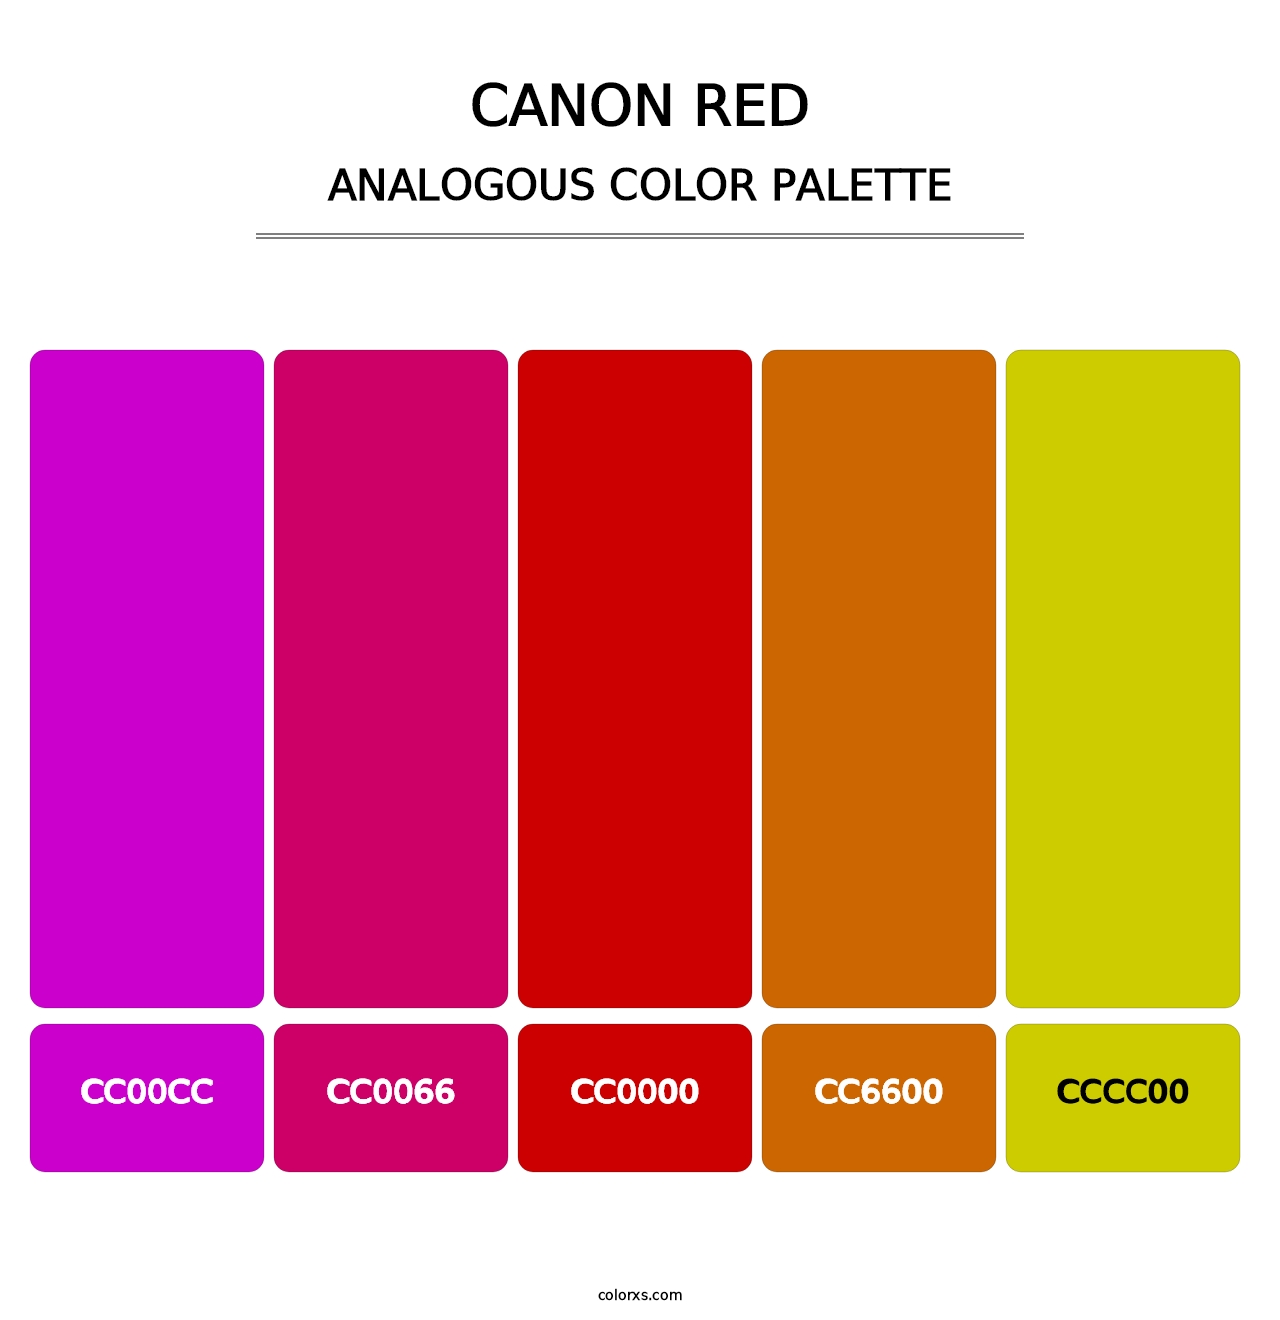 Canon Red - Analogous Color Palette